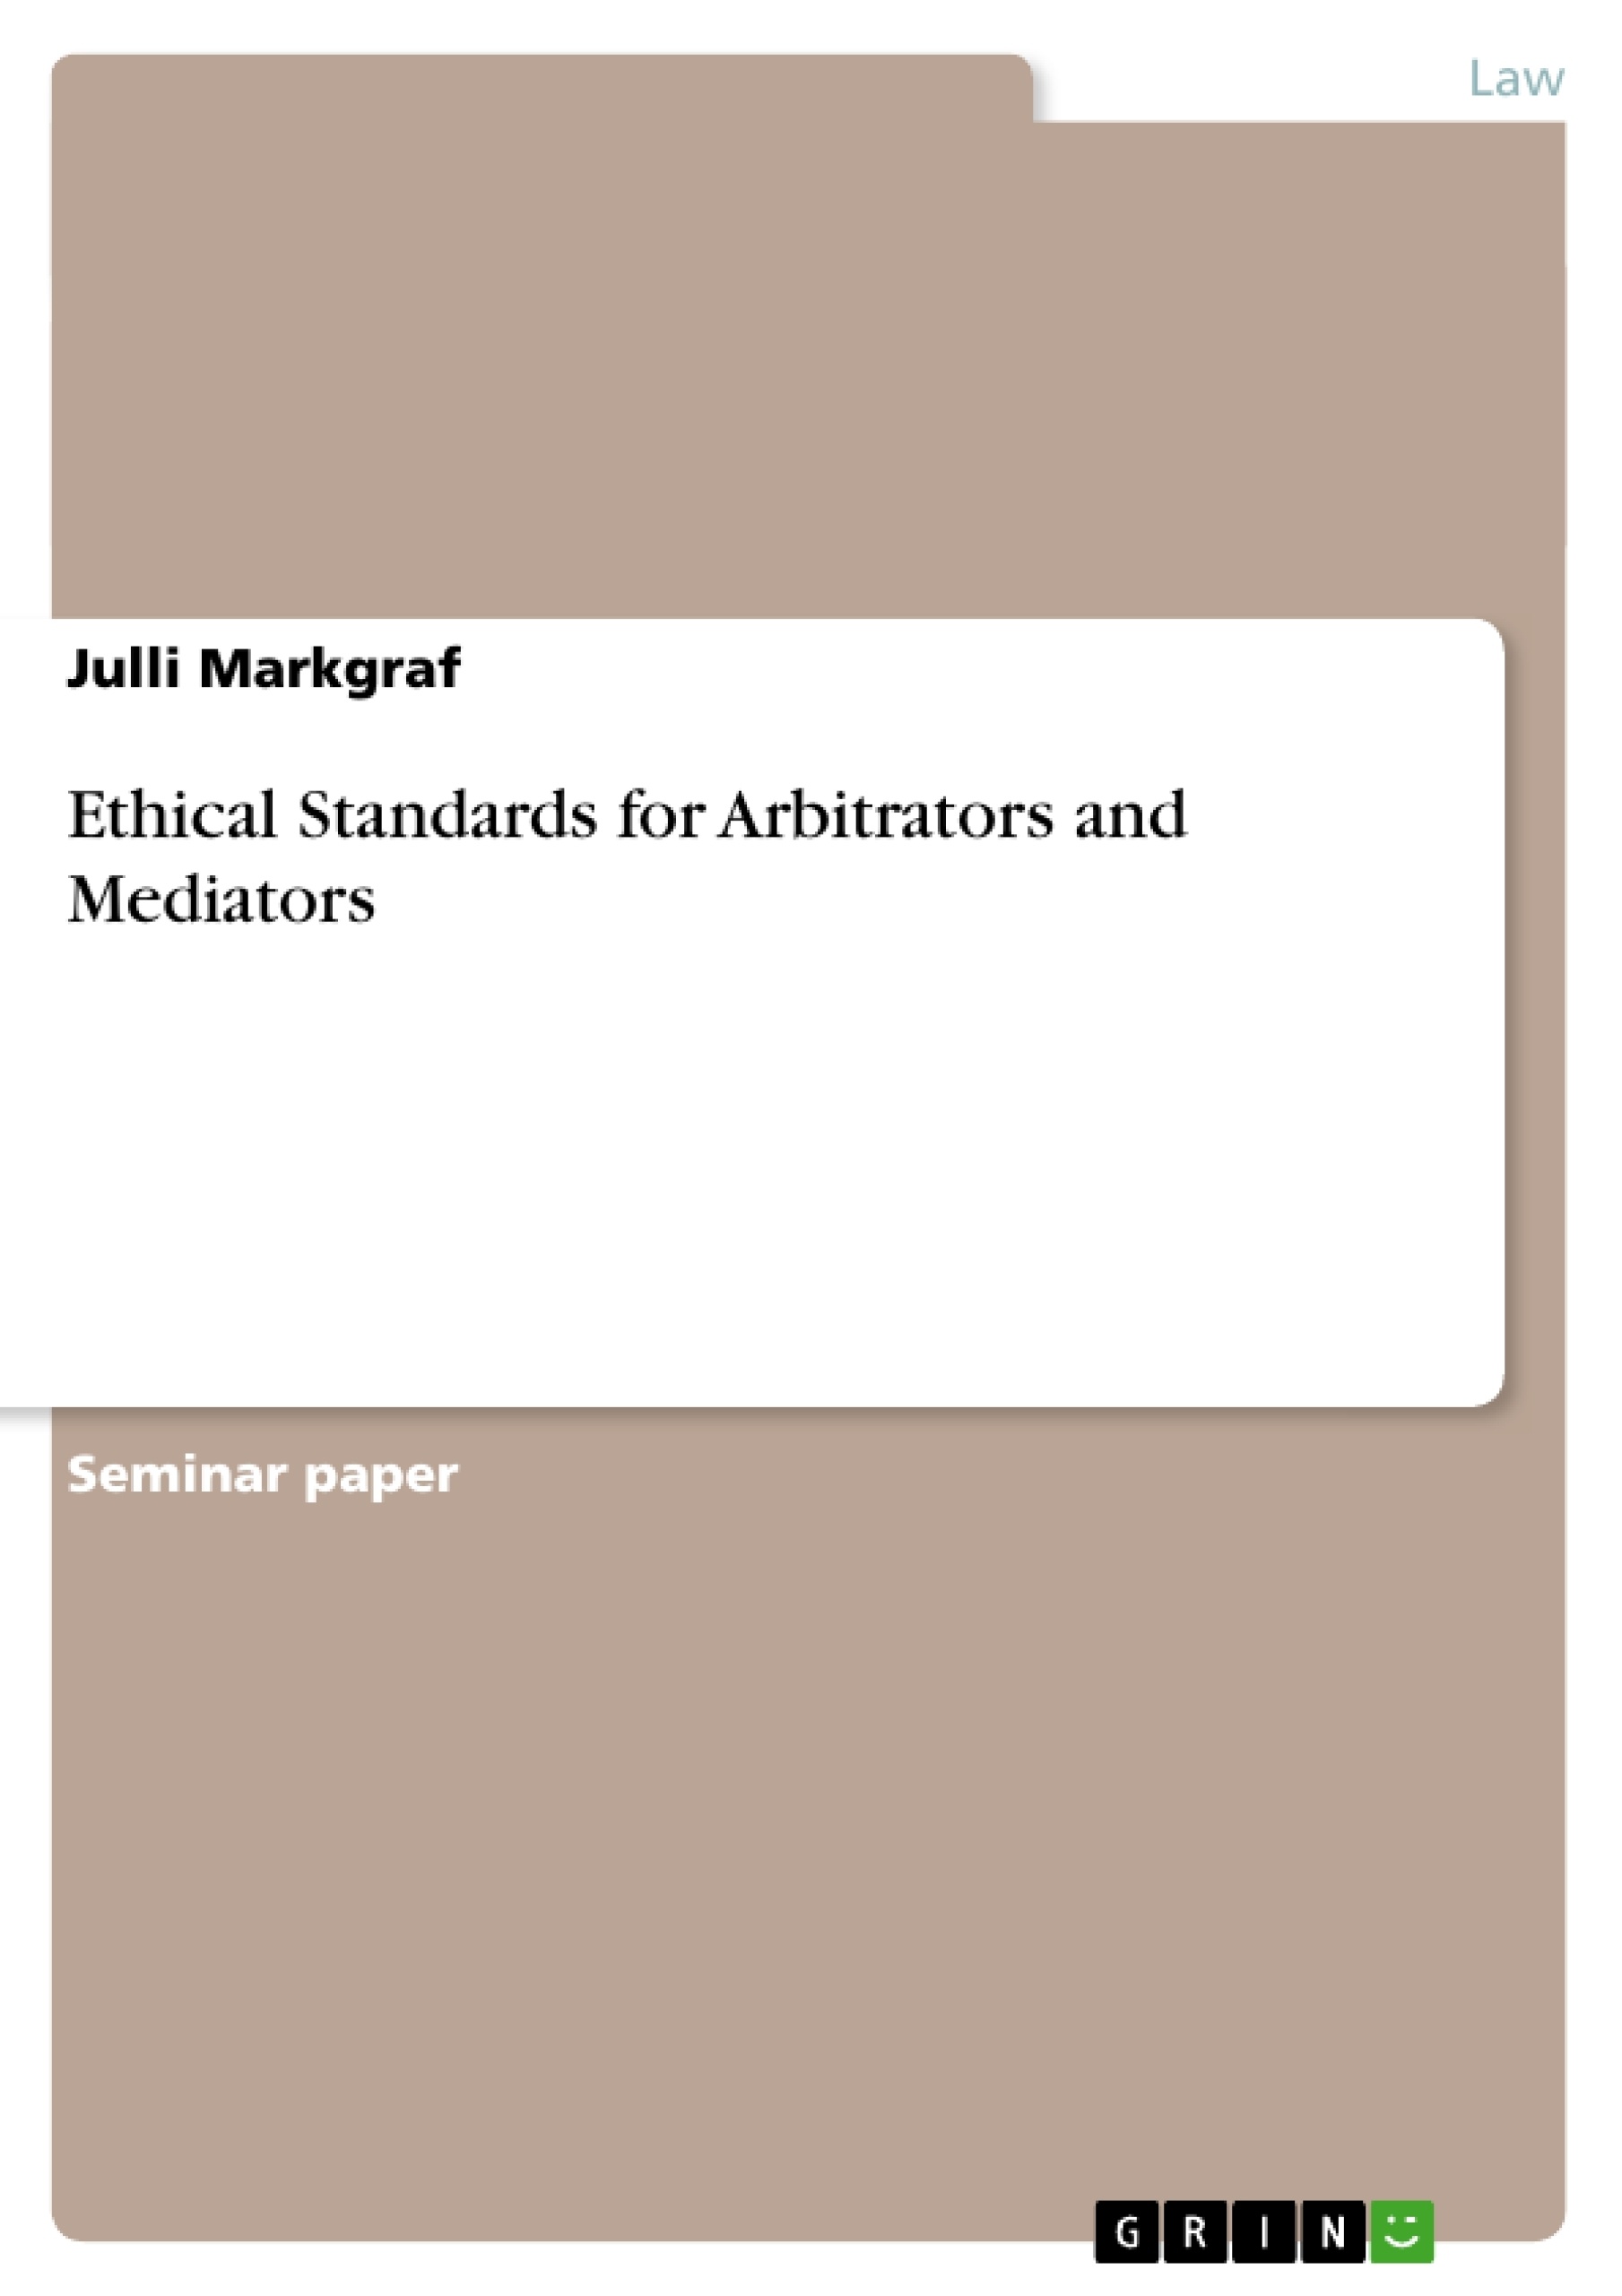 Título: Ethical Standards for Arbitrators and Mediators